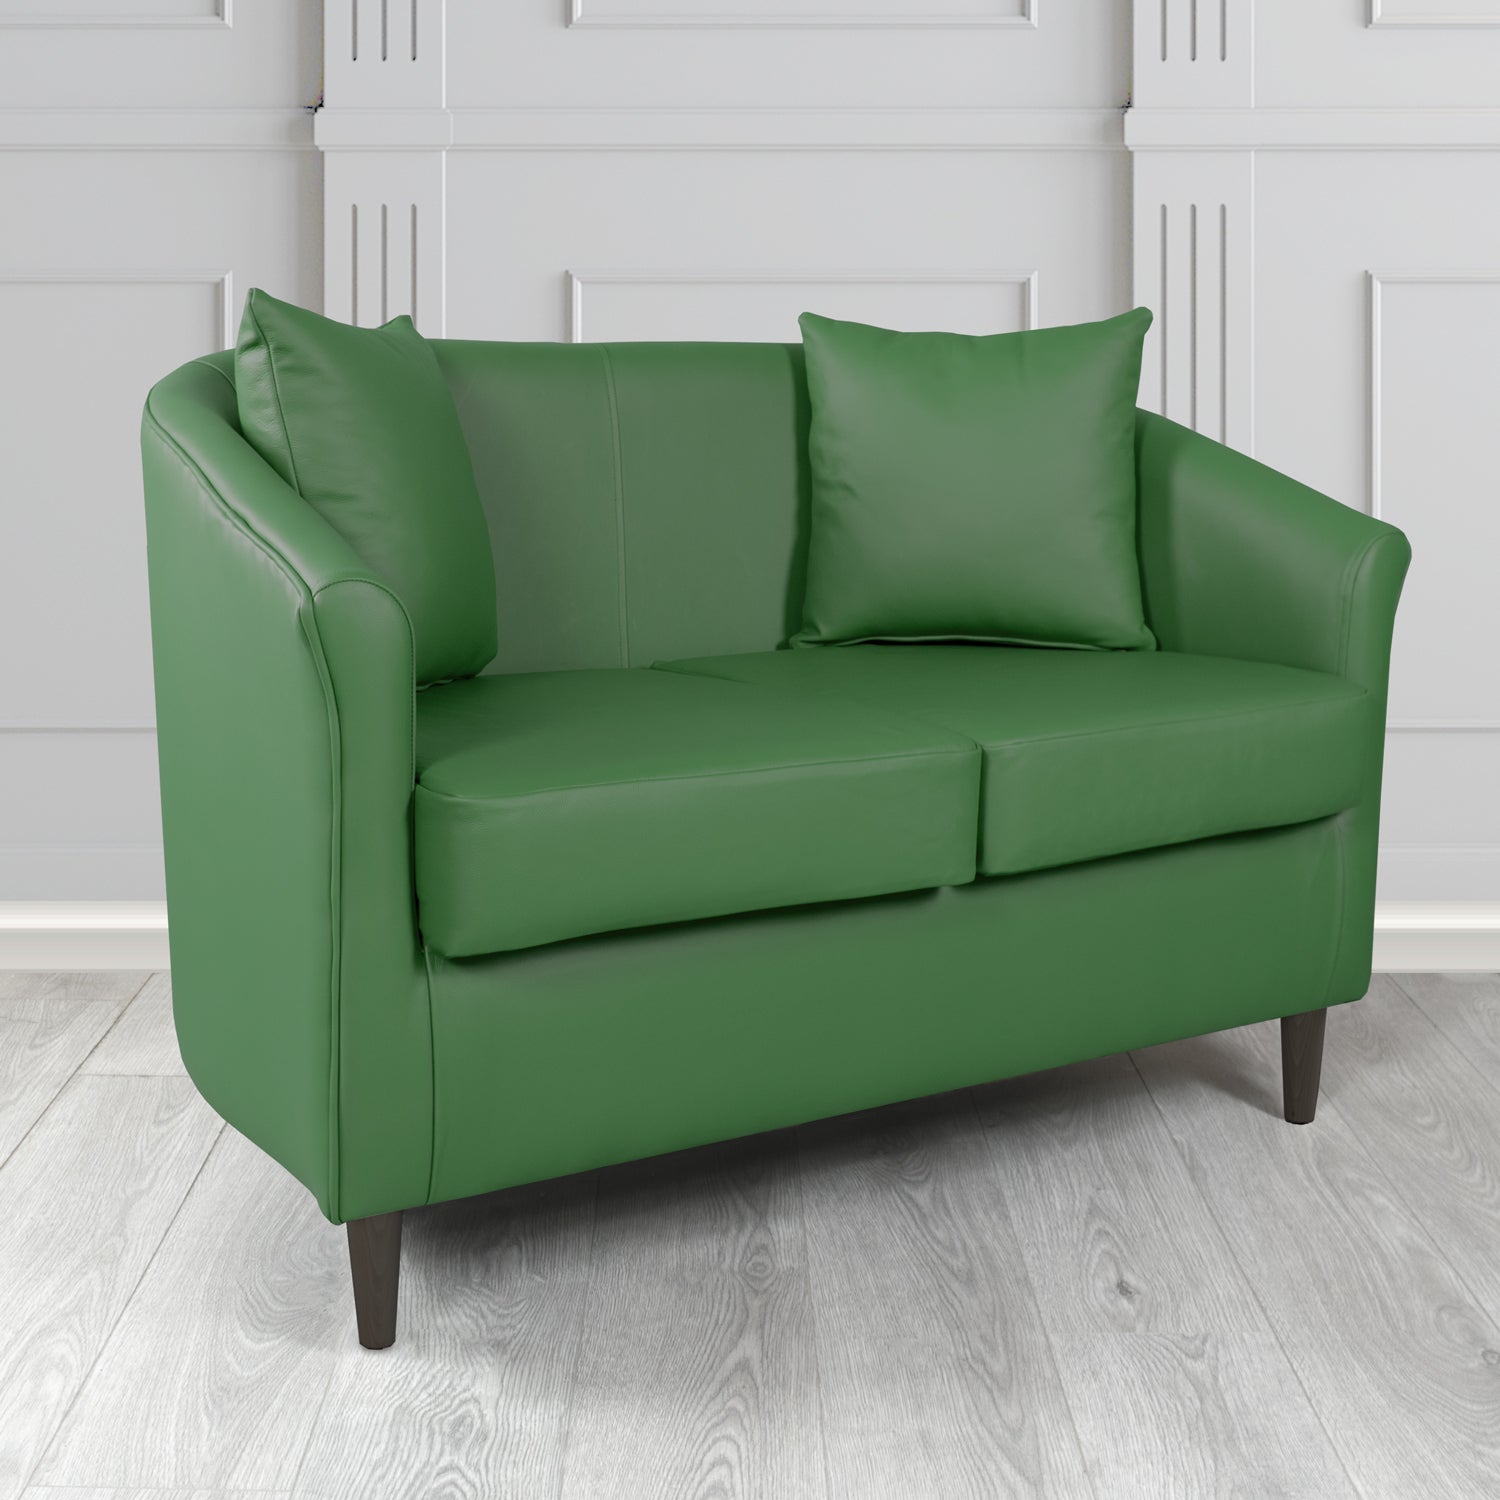 St Tropez Shelly Jade Green Crib 5 Genuine Leather 2 Seater Tub Sofa with Scatter Cushions - The Tub Chair Shop